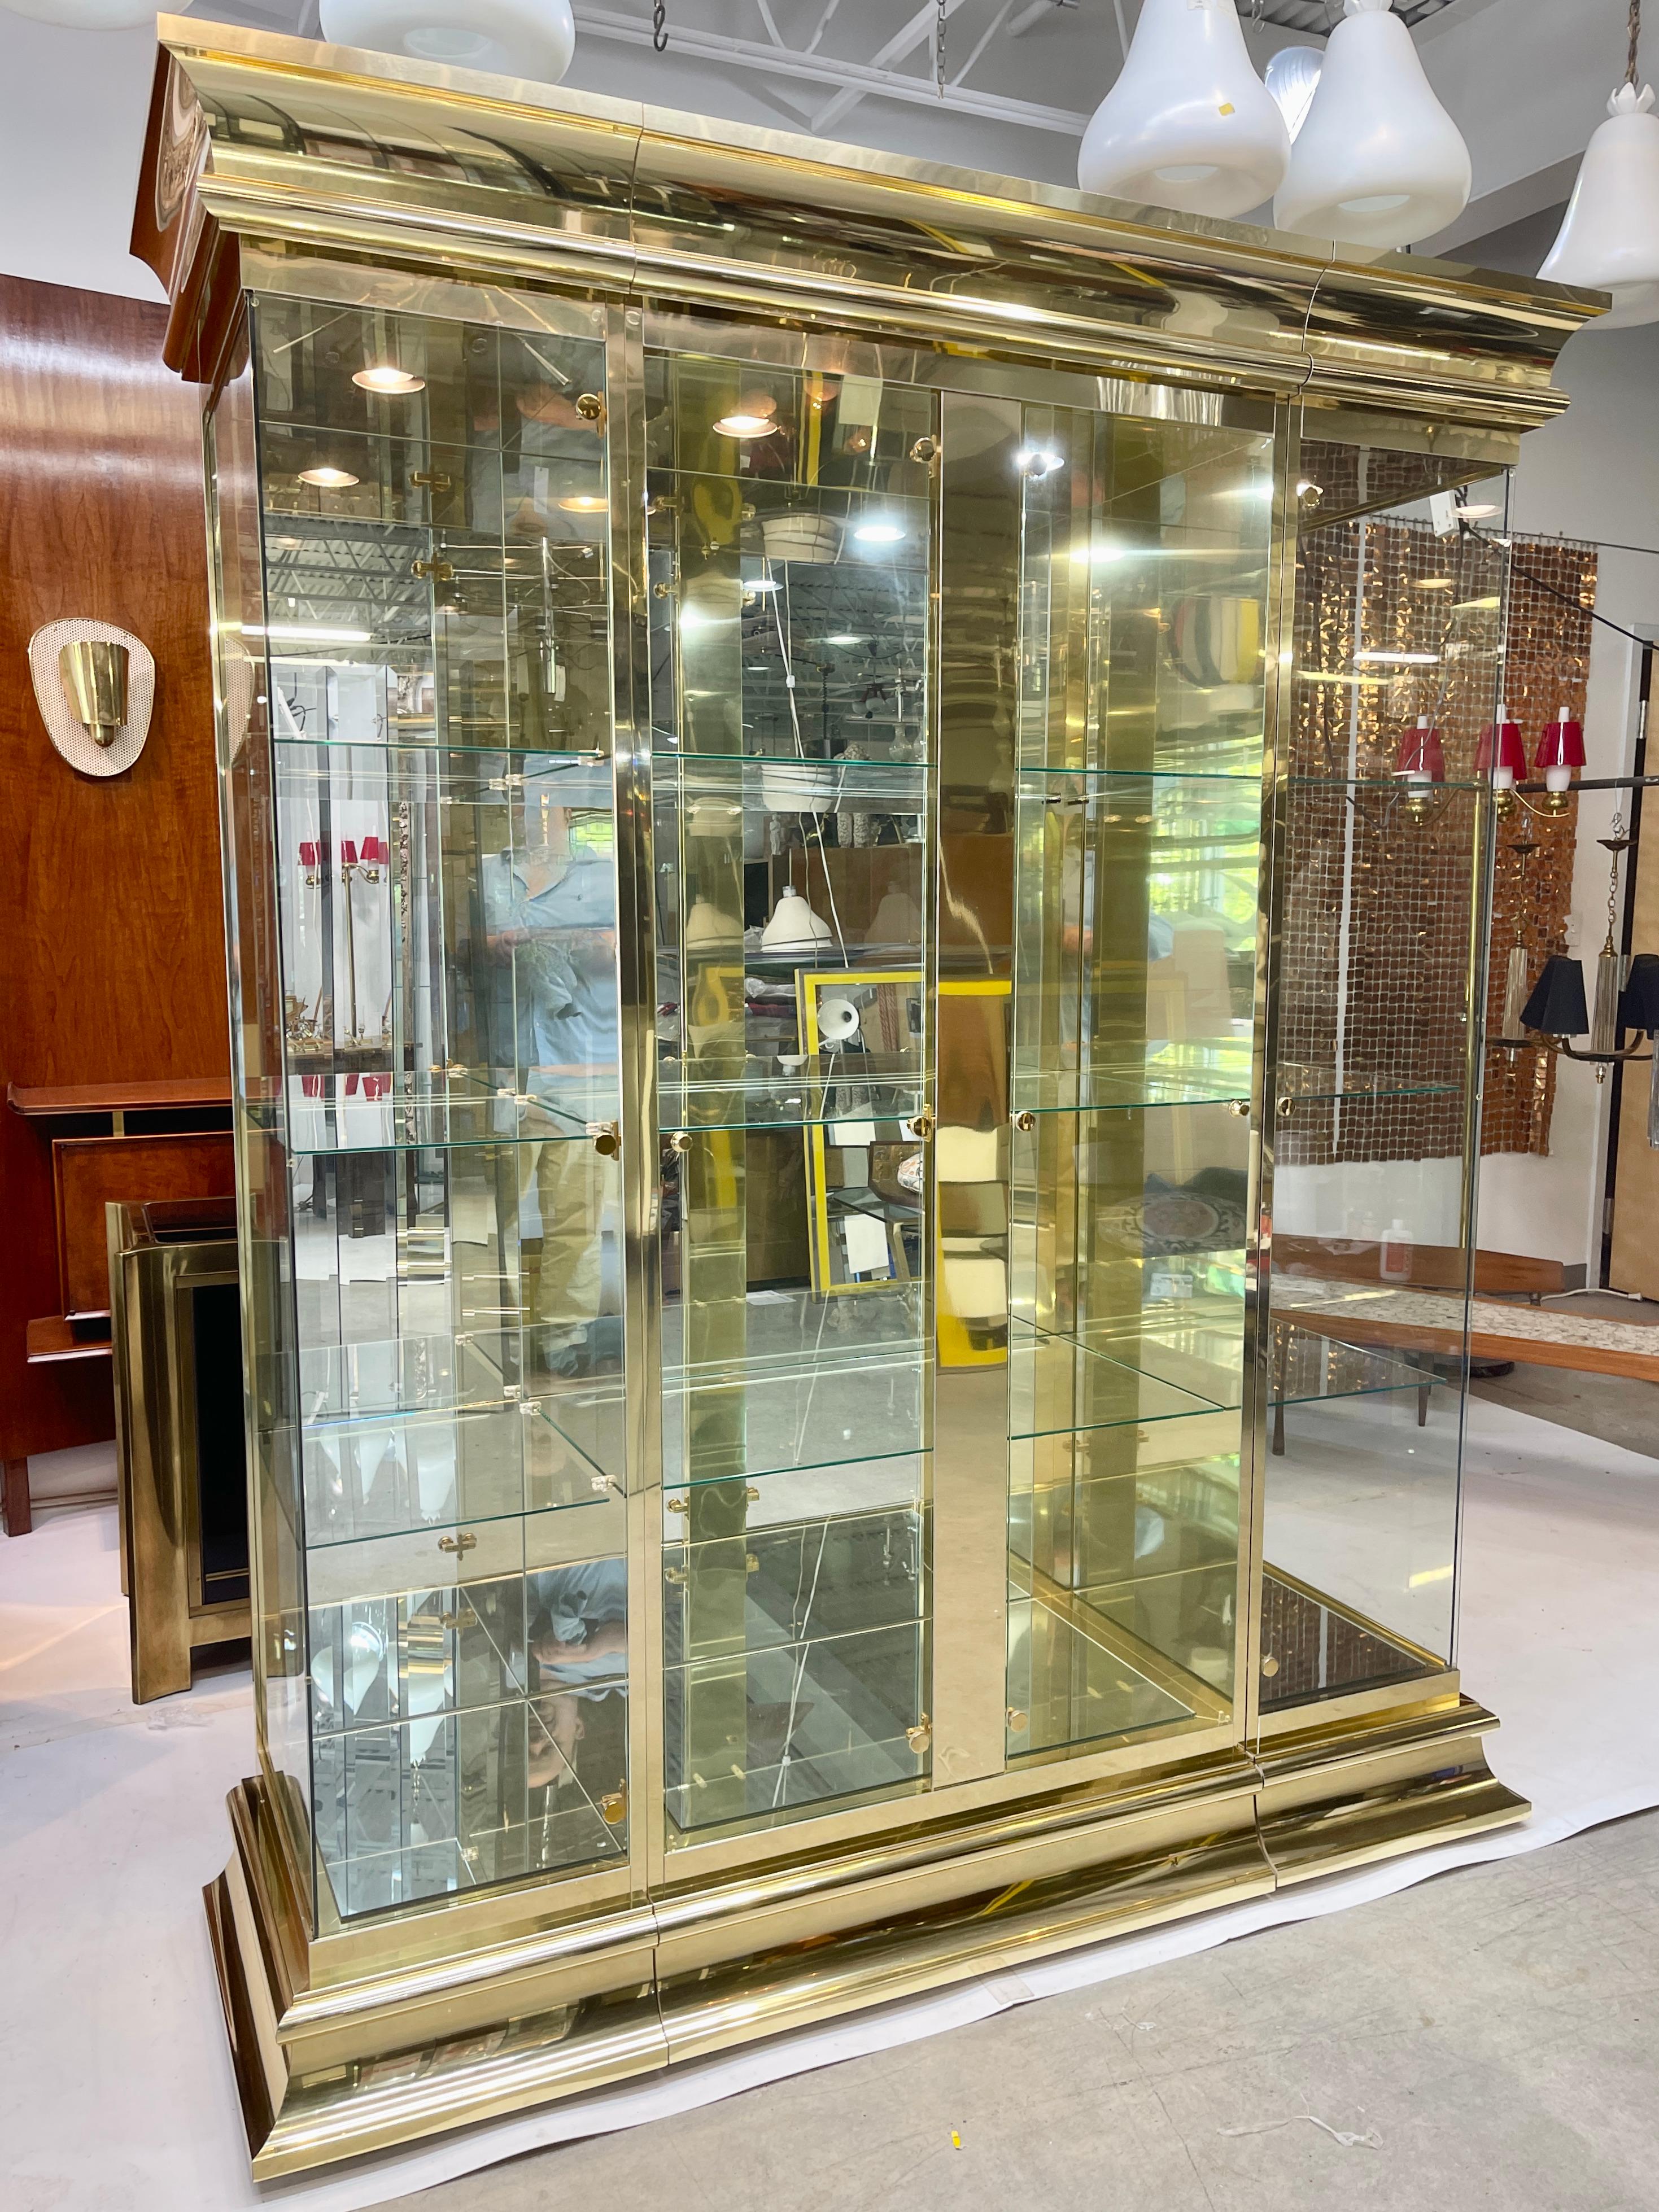 Brass and mirror three section illuminated curio display showcase designed by O. B. Solie in 1986 for Ello Furniture Manufacturing Corp. of Rockford, IL as part of the LaCage Collection. 
Nine glass shelves with engraved plate slots. Mirror floors